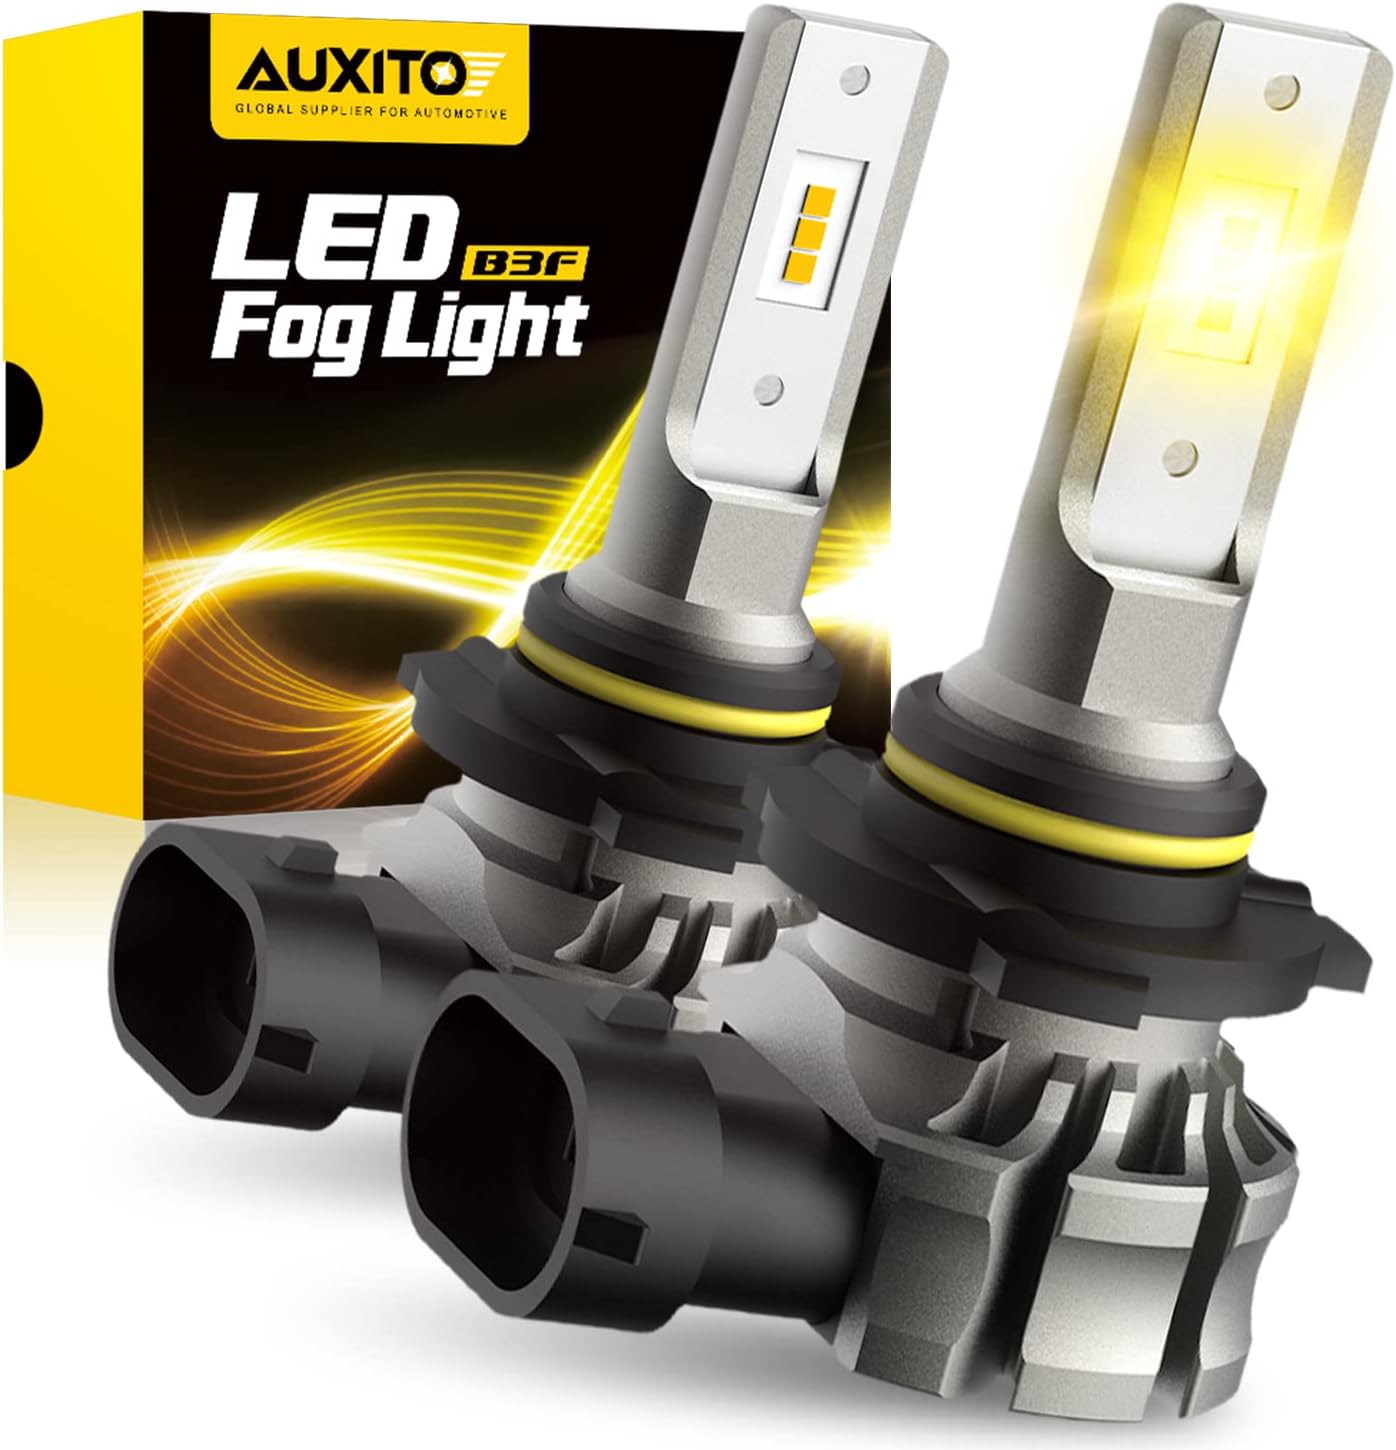 Save 40% on AUXITO 9145 LED Fog Light Bulbs - Limited Time Offer!